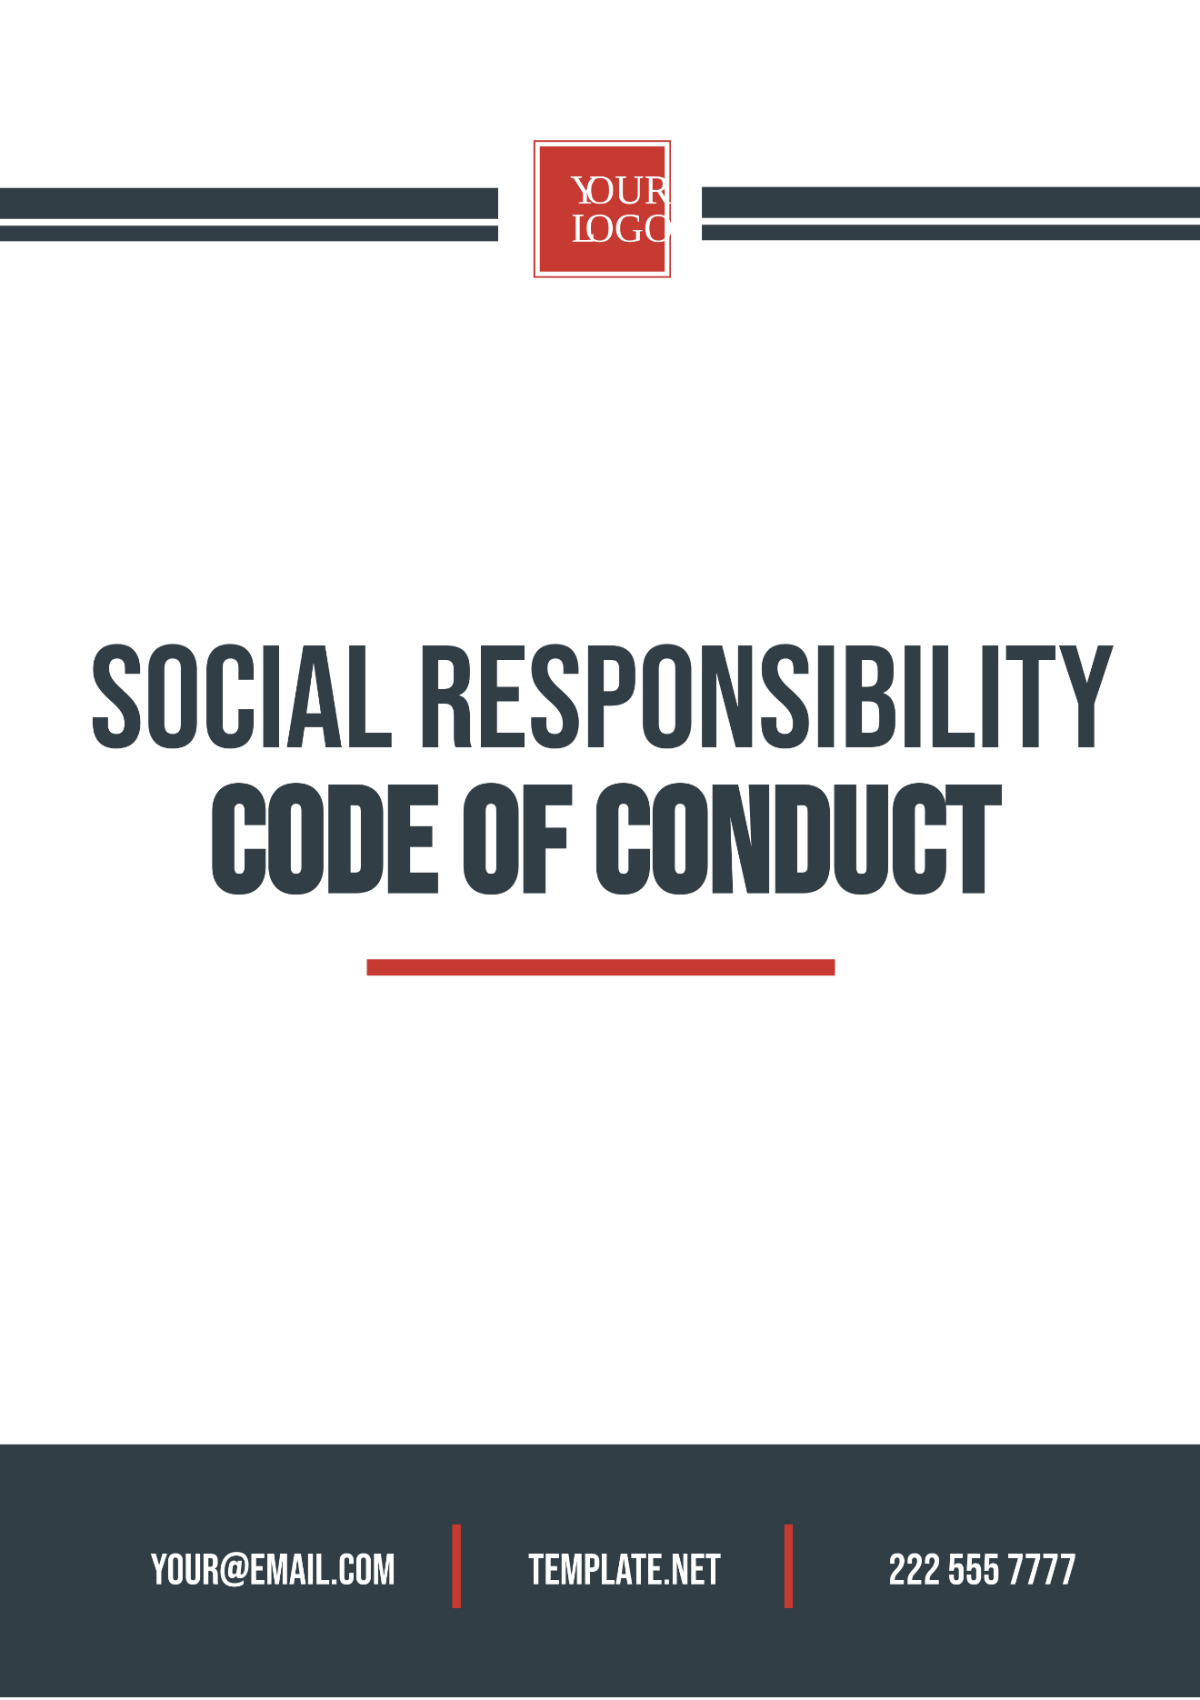 Social Responsibility Code of Conduct Template